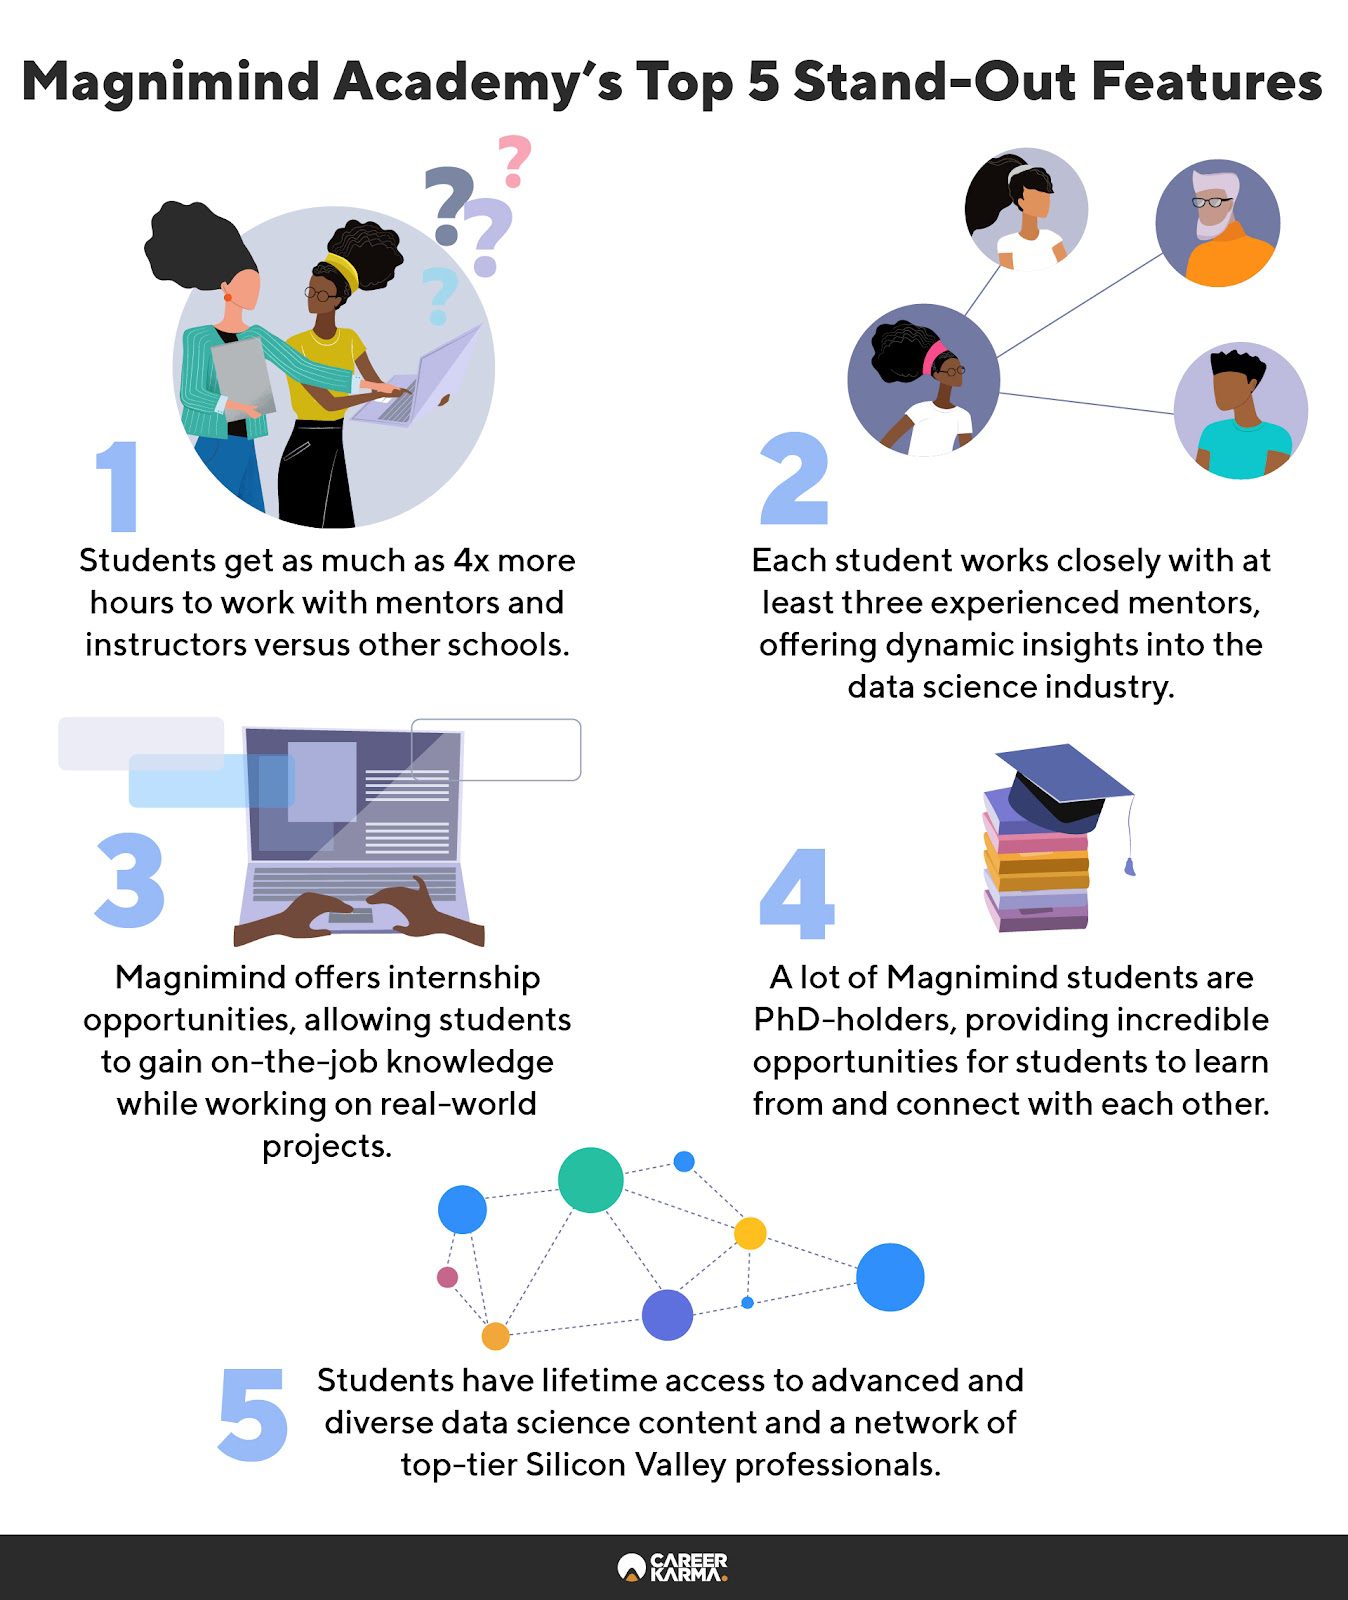 An infographic highlighting the key features of Magnimind Academy